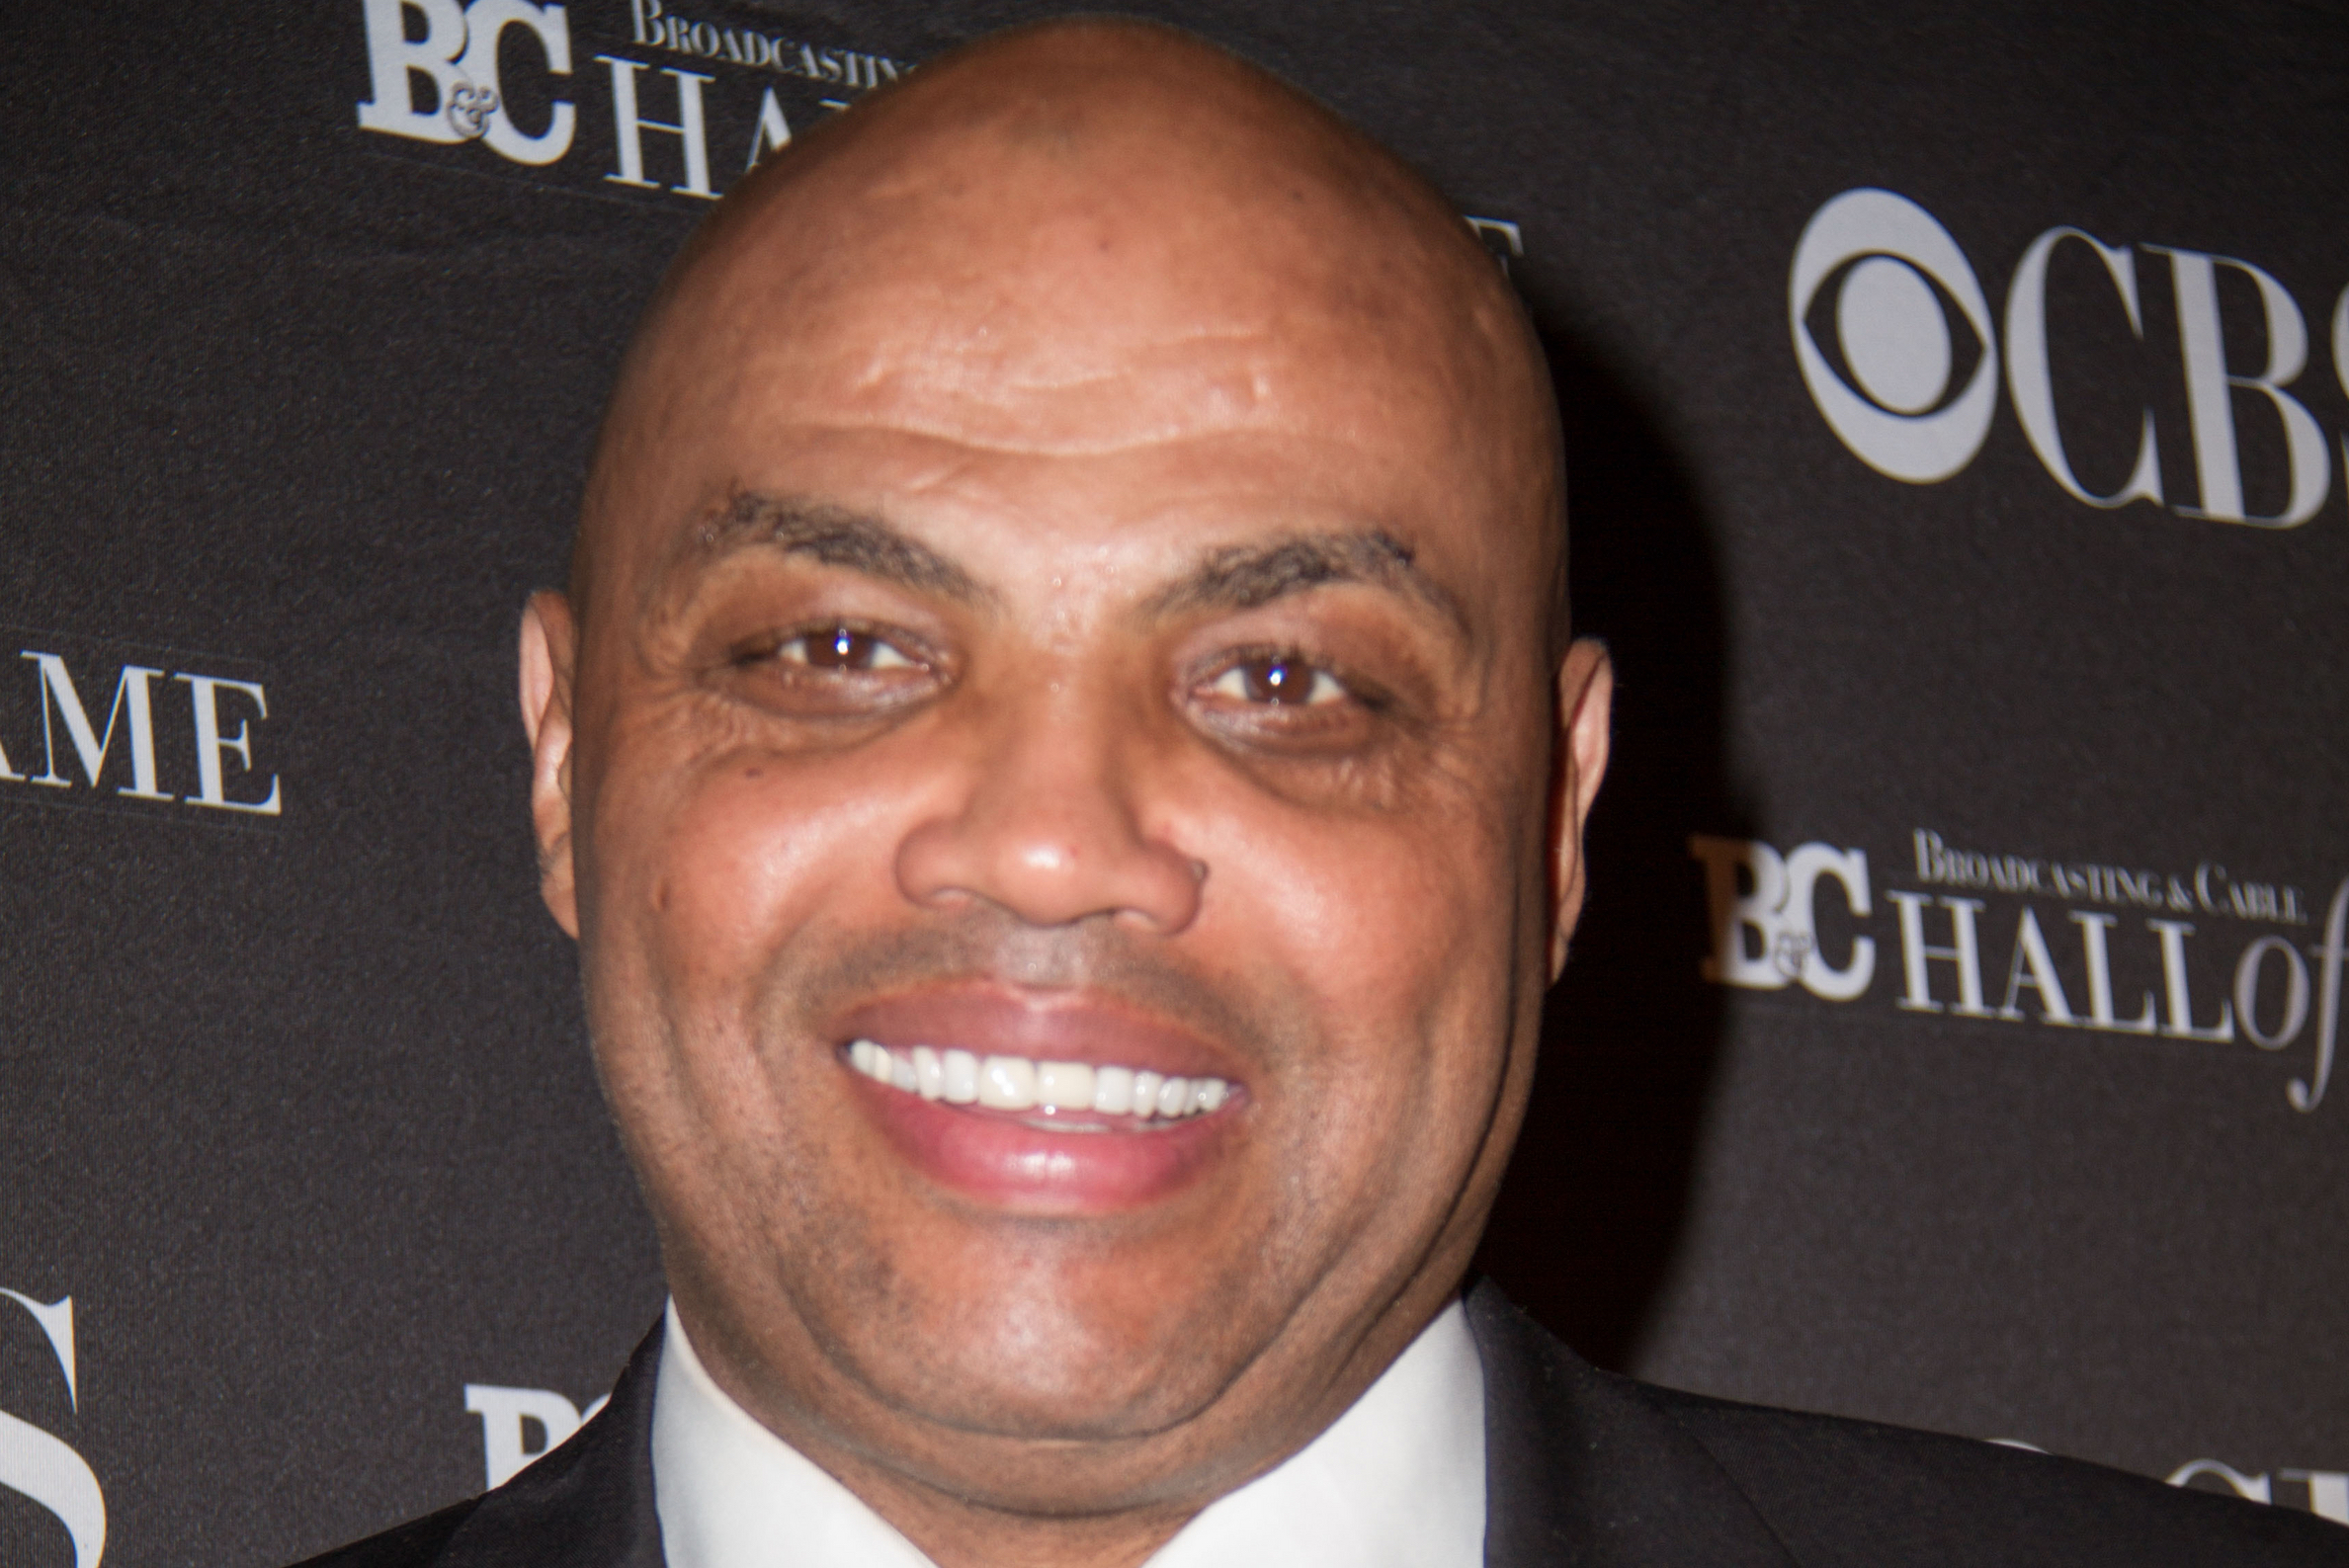 10/18/2016 - Charles Barkley - Broadcasting and Cable Hall of Fame 26th Anniversary Gala - Waldorf Astoria New York, 301 Park Avenue - New York City, NY, USA - Keywords: Vertical, 2016 Broadcasting & Cable Hall Of Fame 26th Anniversary Gala, Radio, Award, TV Show, Television Show, Photography, Portrait, Arts Culture and Entertainment, Arrival, Attending, Celebrities, Celebrity, Person, People Orientation: Portrait Face Count: 1 - False - Photo Credit: Lisa Holte / PRPhotos.com - Contact (1-866-551-7827) - Portrait Face Count: 1